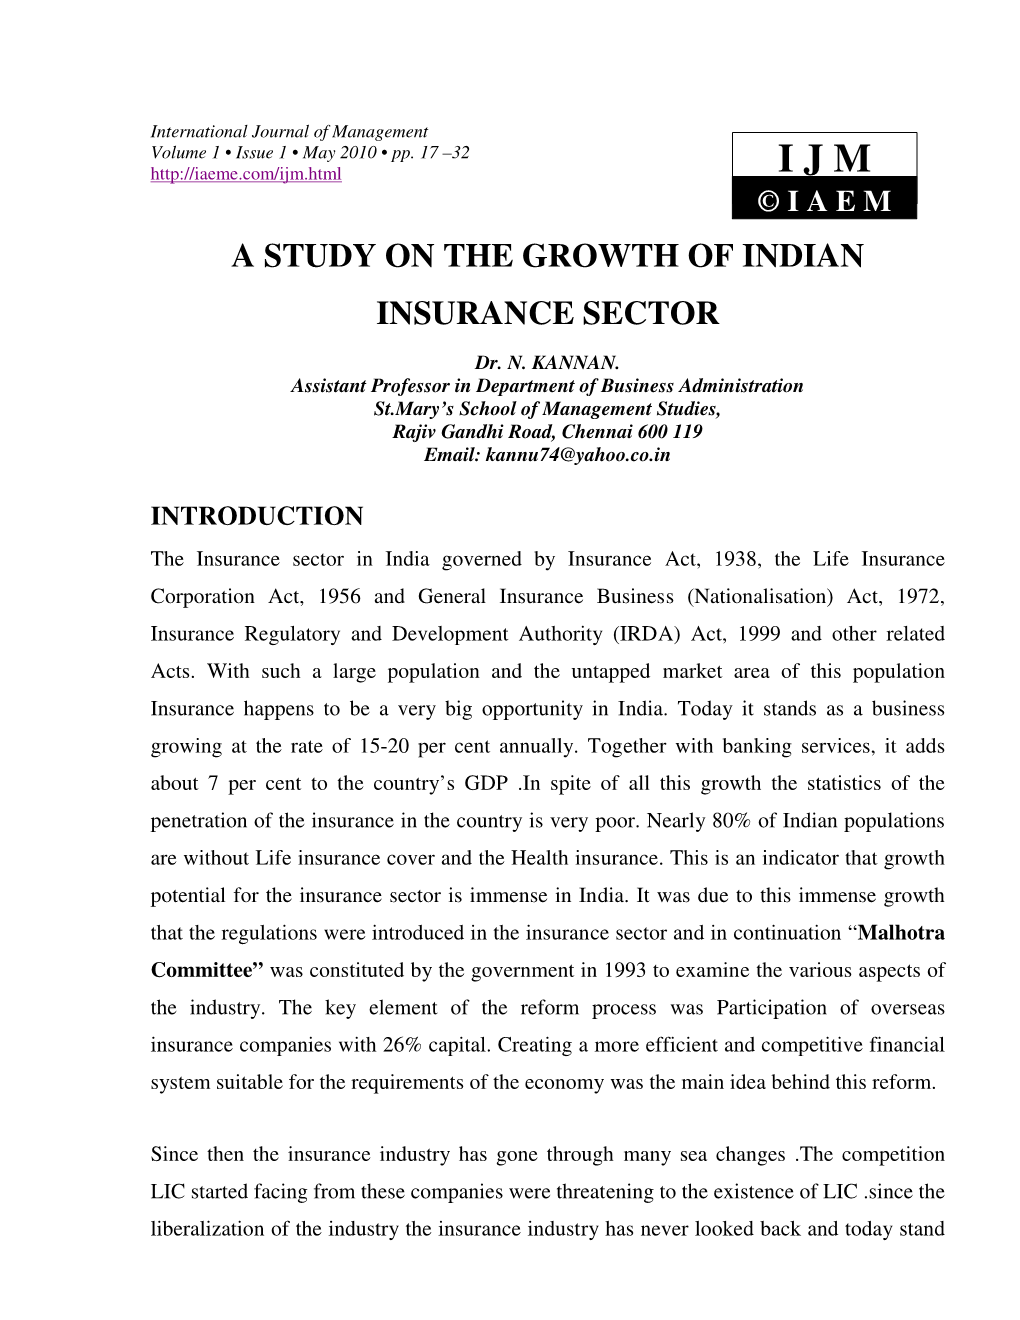 A Study on the Growth of Indian Insurance Sector